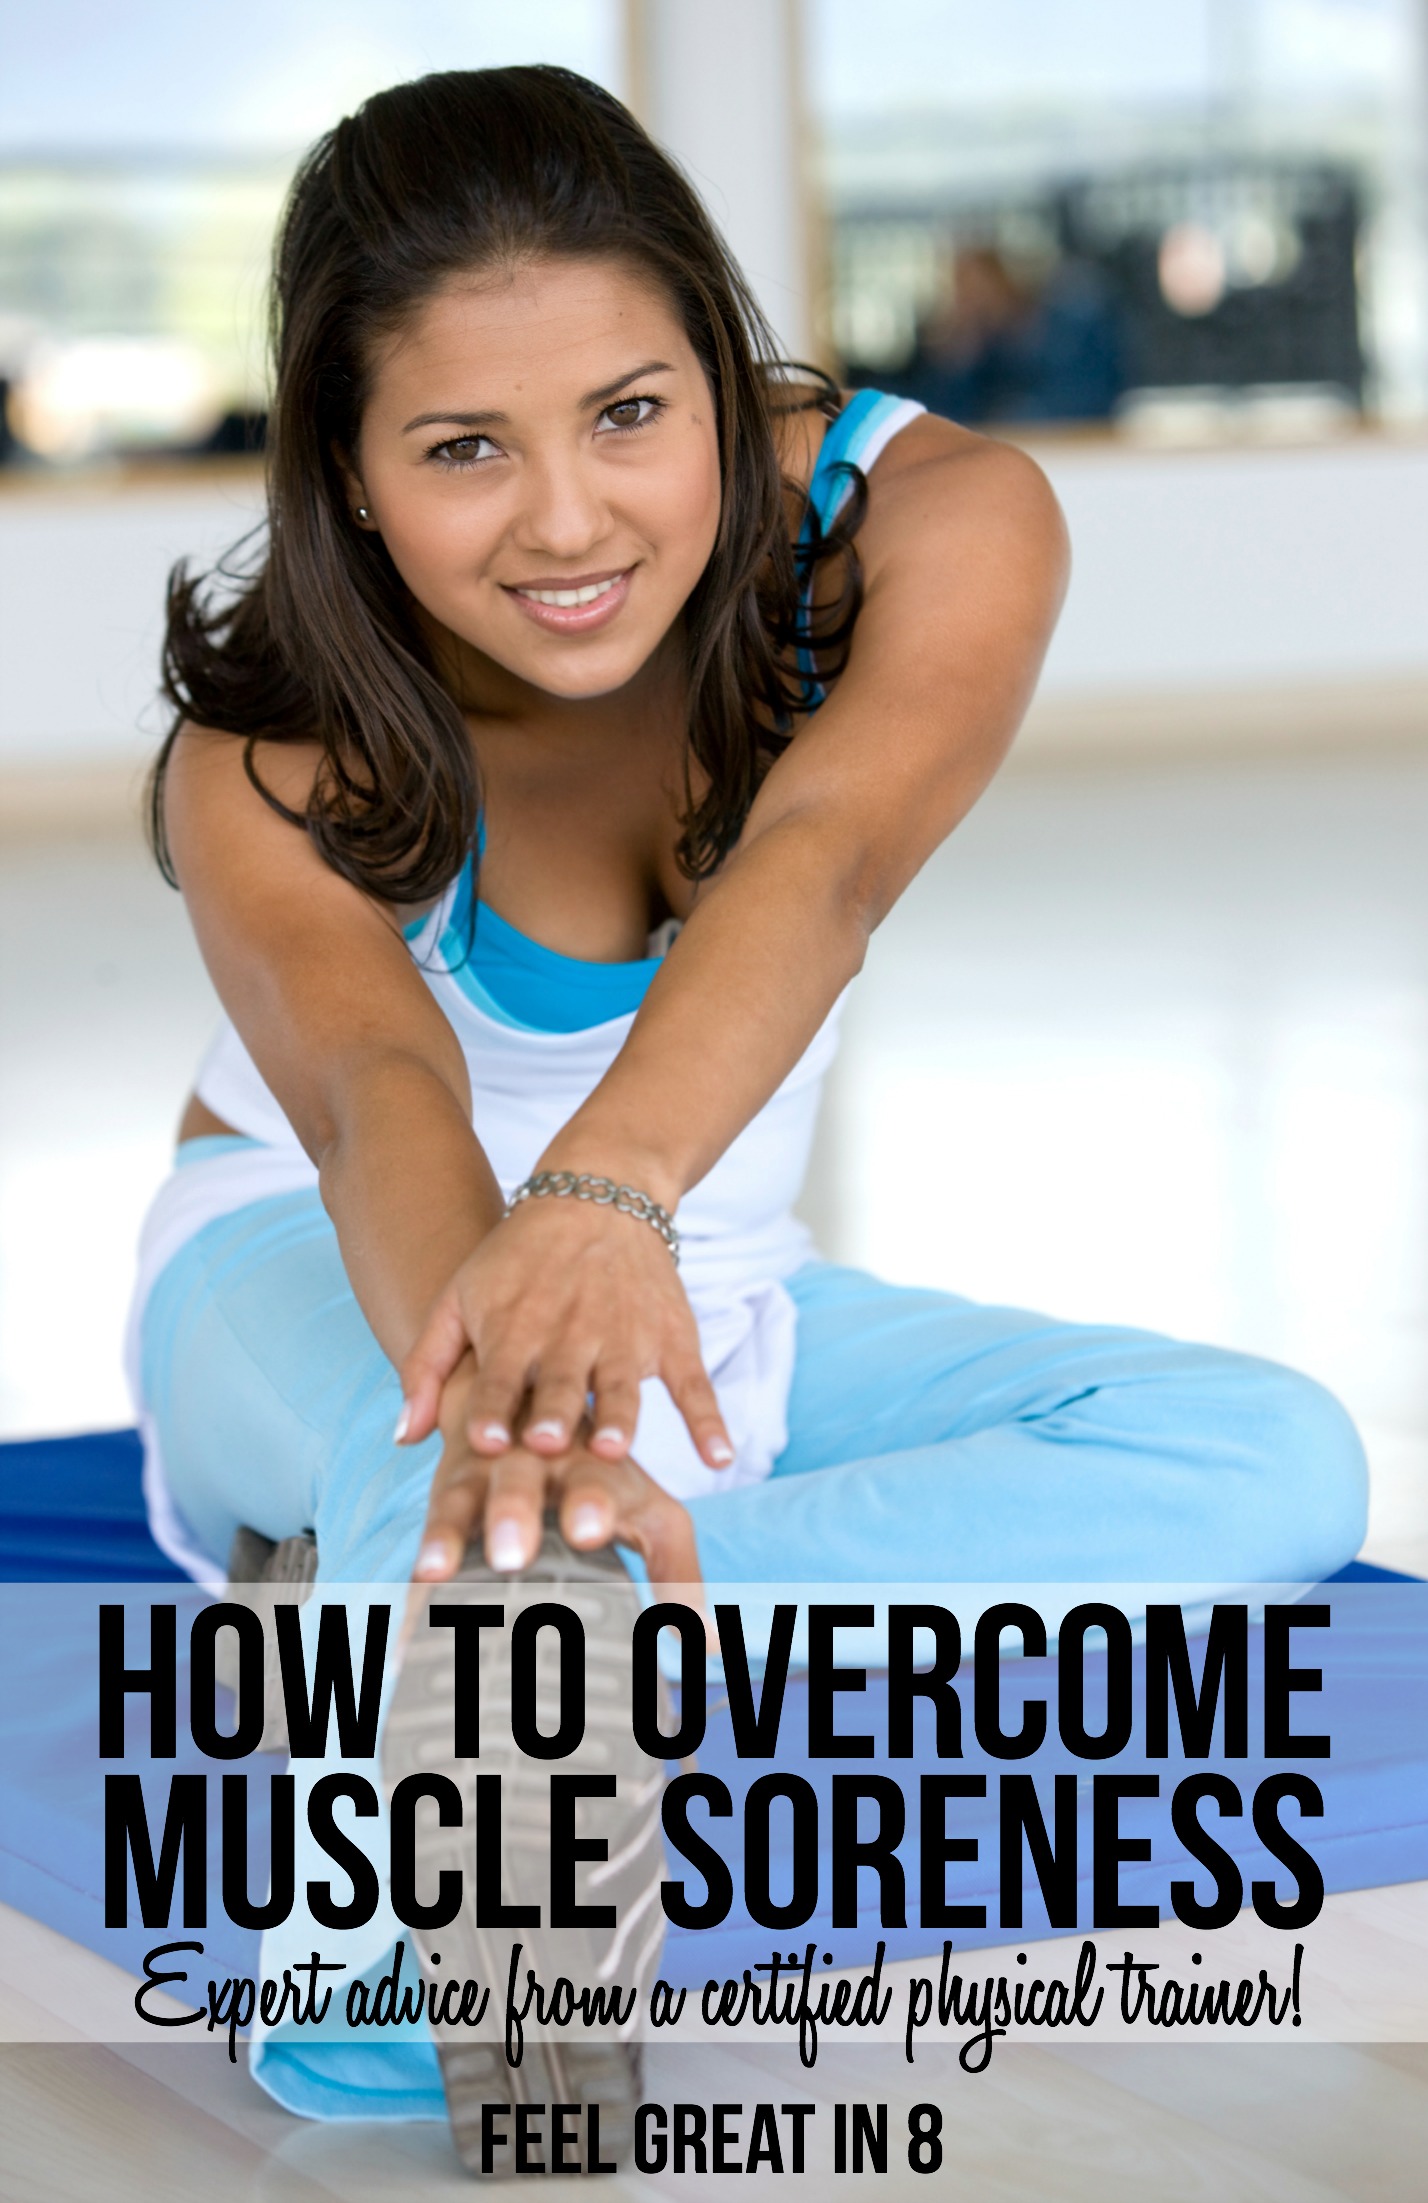 How to Overcome Muscle Soreness - Expert advice from a certified personal trainer! | Feel Great in 8